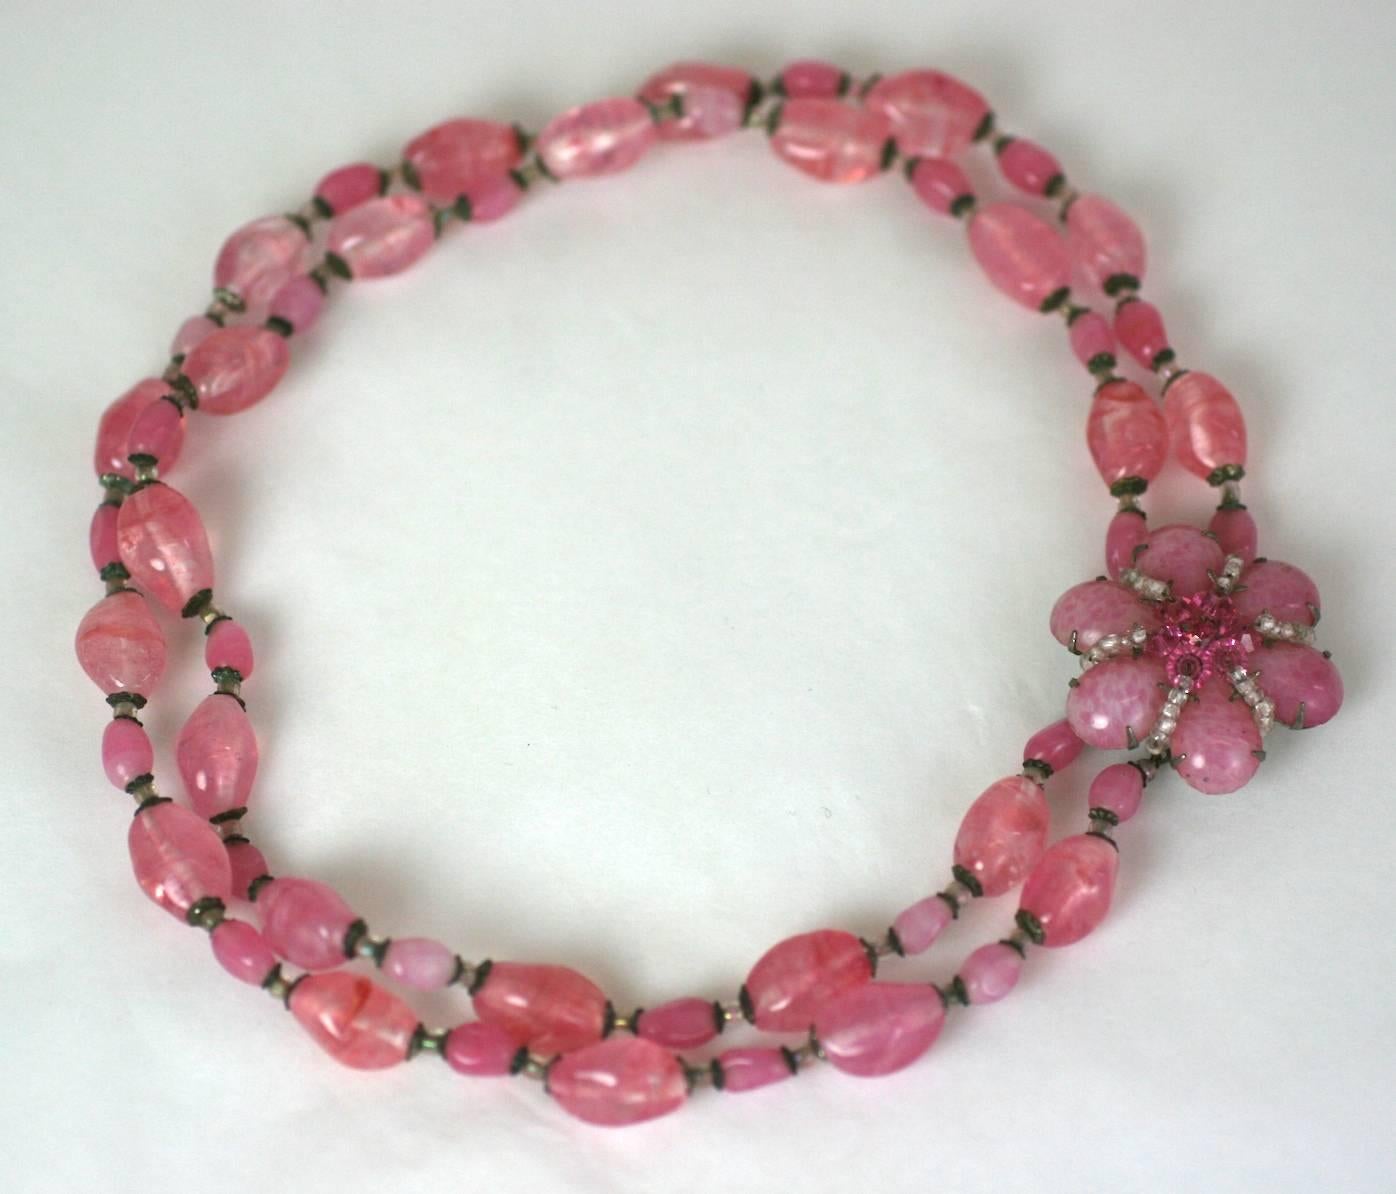 Miriam Haskell Pink Pate de Verre Bead Necklace with floral clasp. Mottled pink pate de verre beads are used with crystal spacers and a hand sewn beaded clasp. 1950's USA. 
15.5